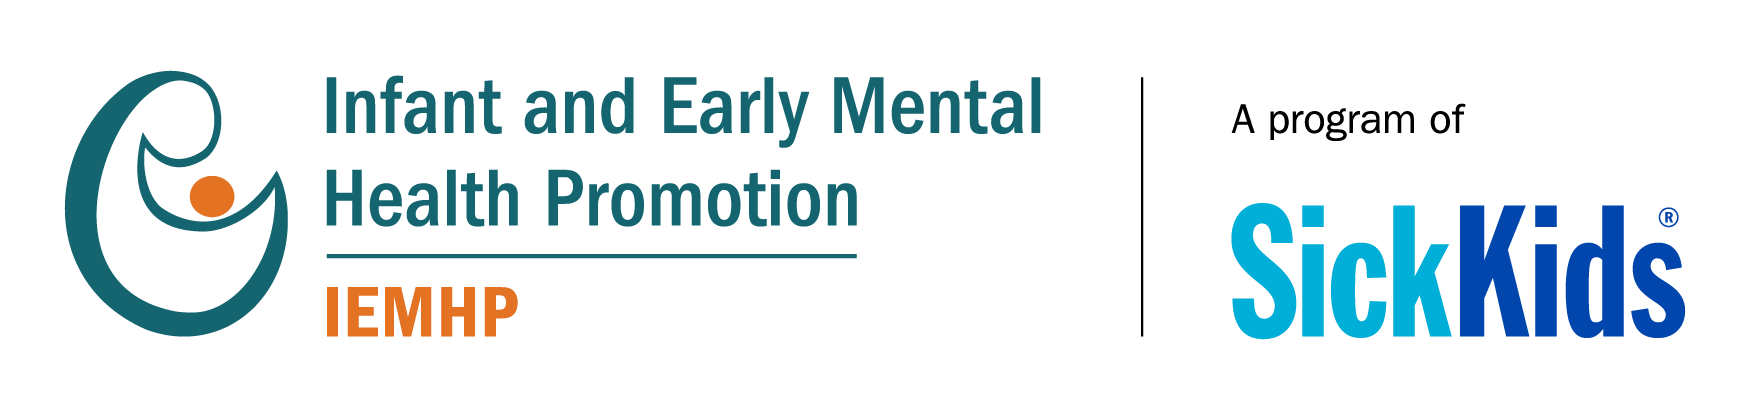 infant and early mental health promotion